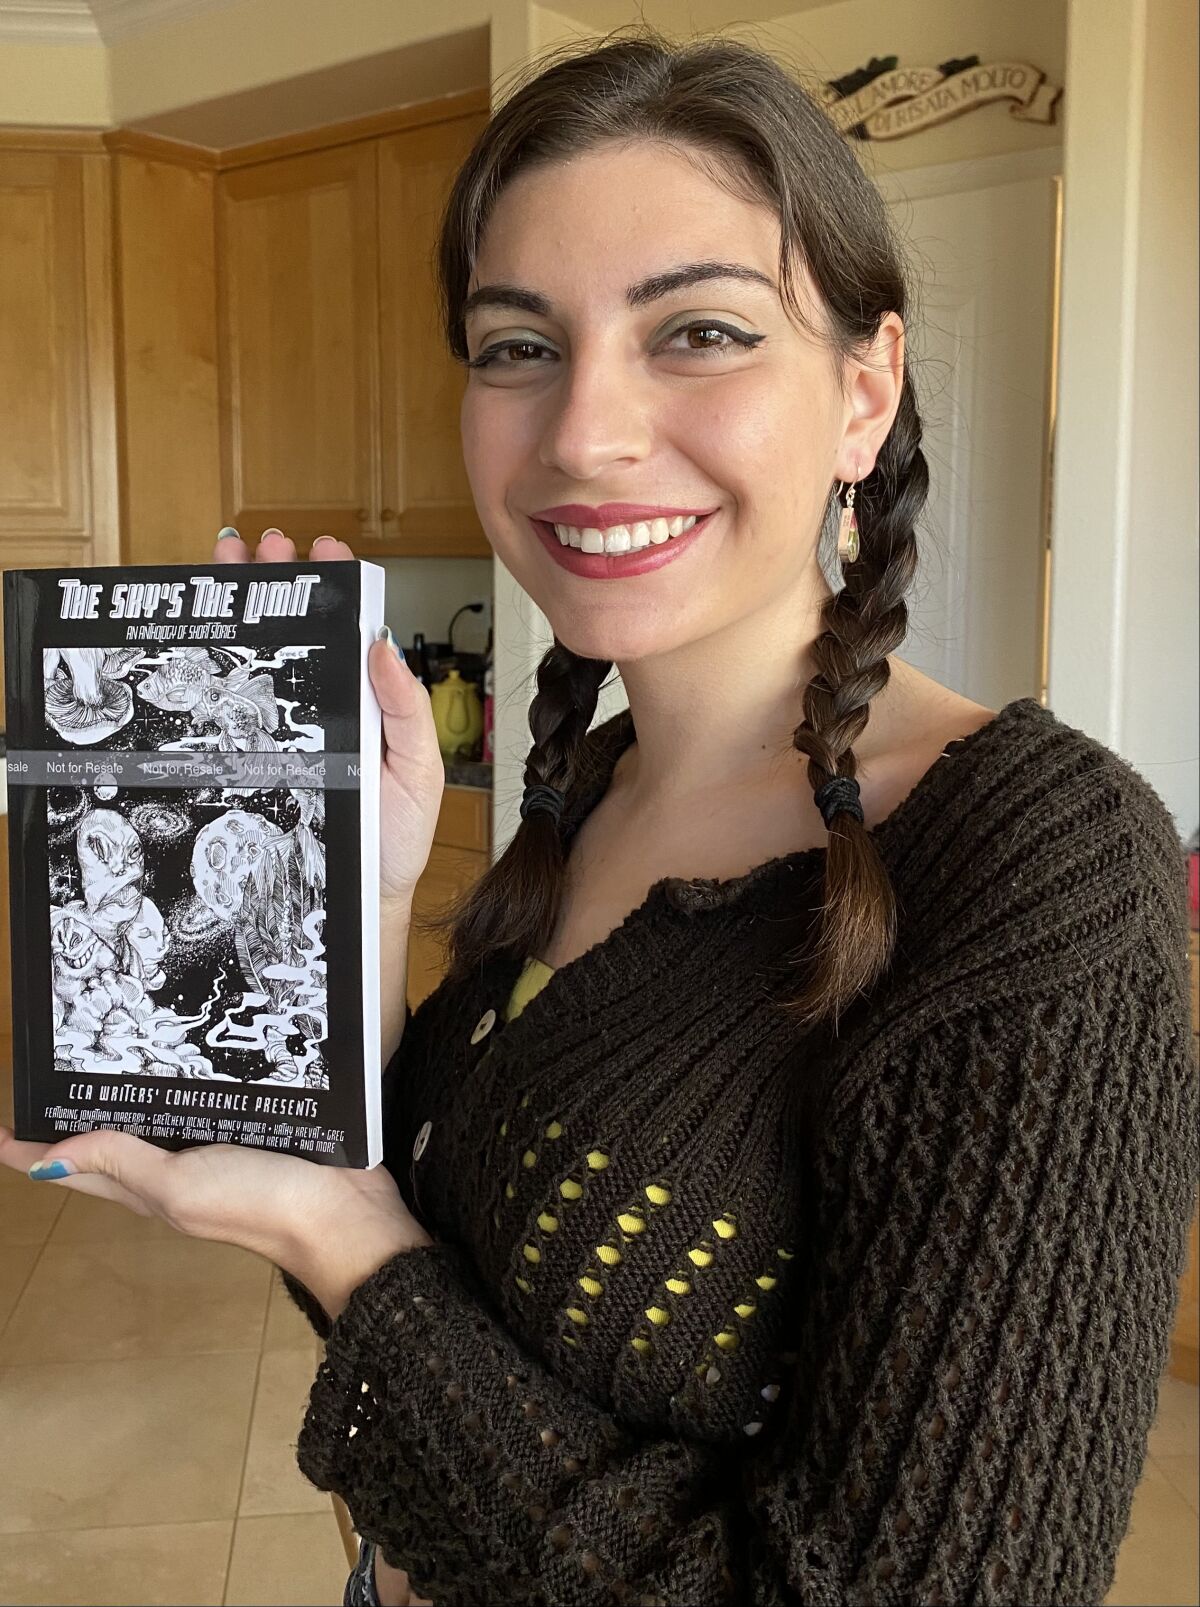 Sophie Camilleri with the 10th anniversary anthology, The Sky’s the Limit.